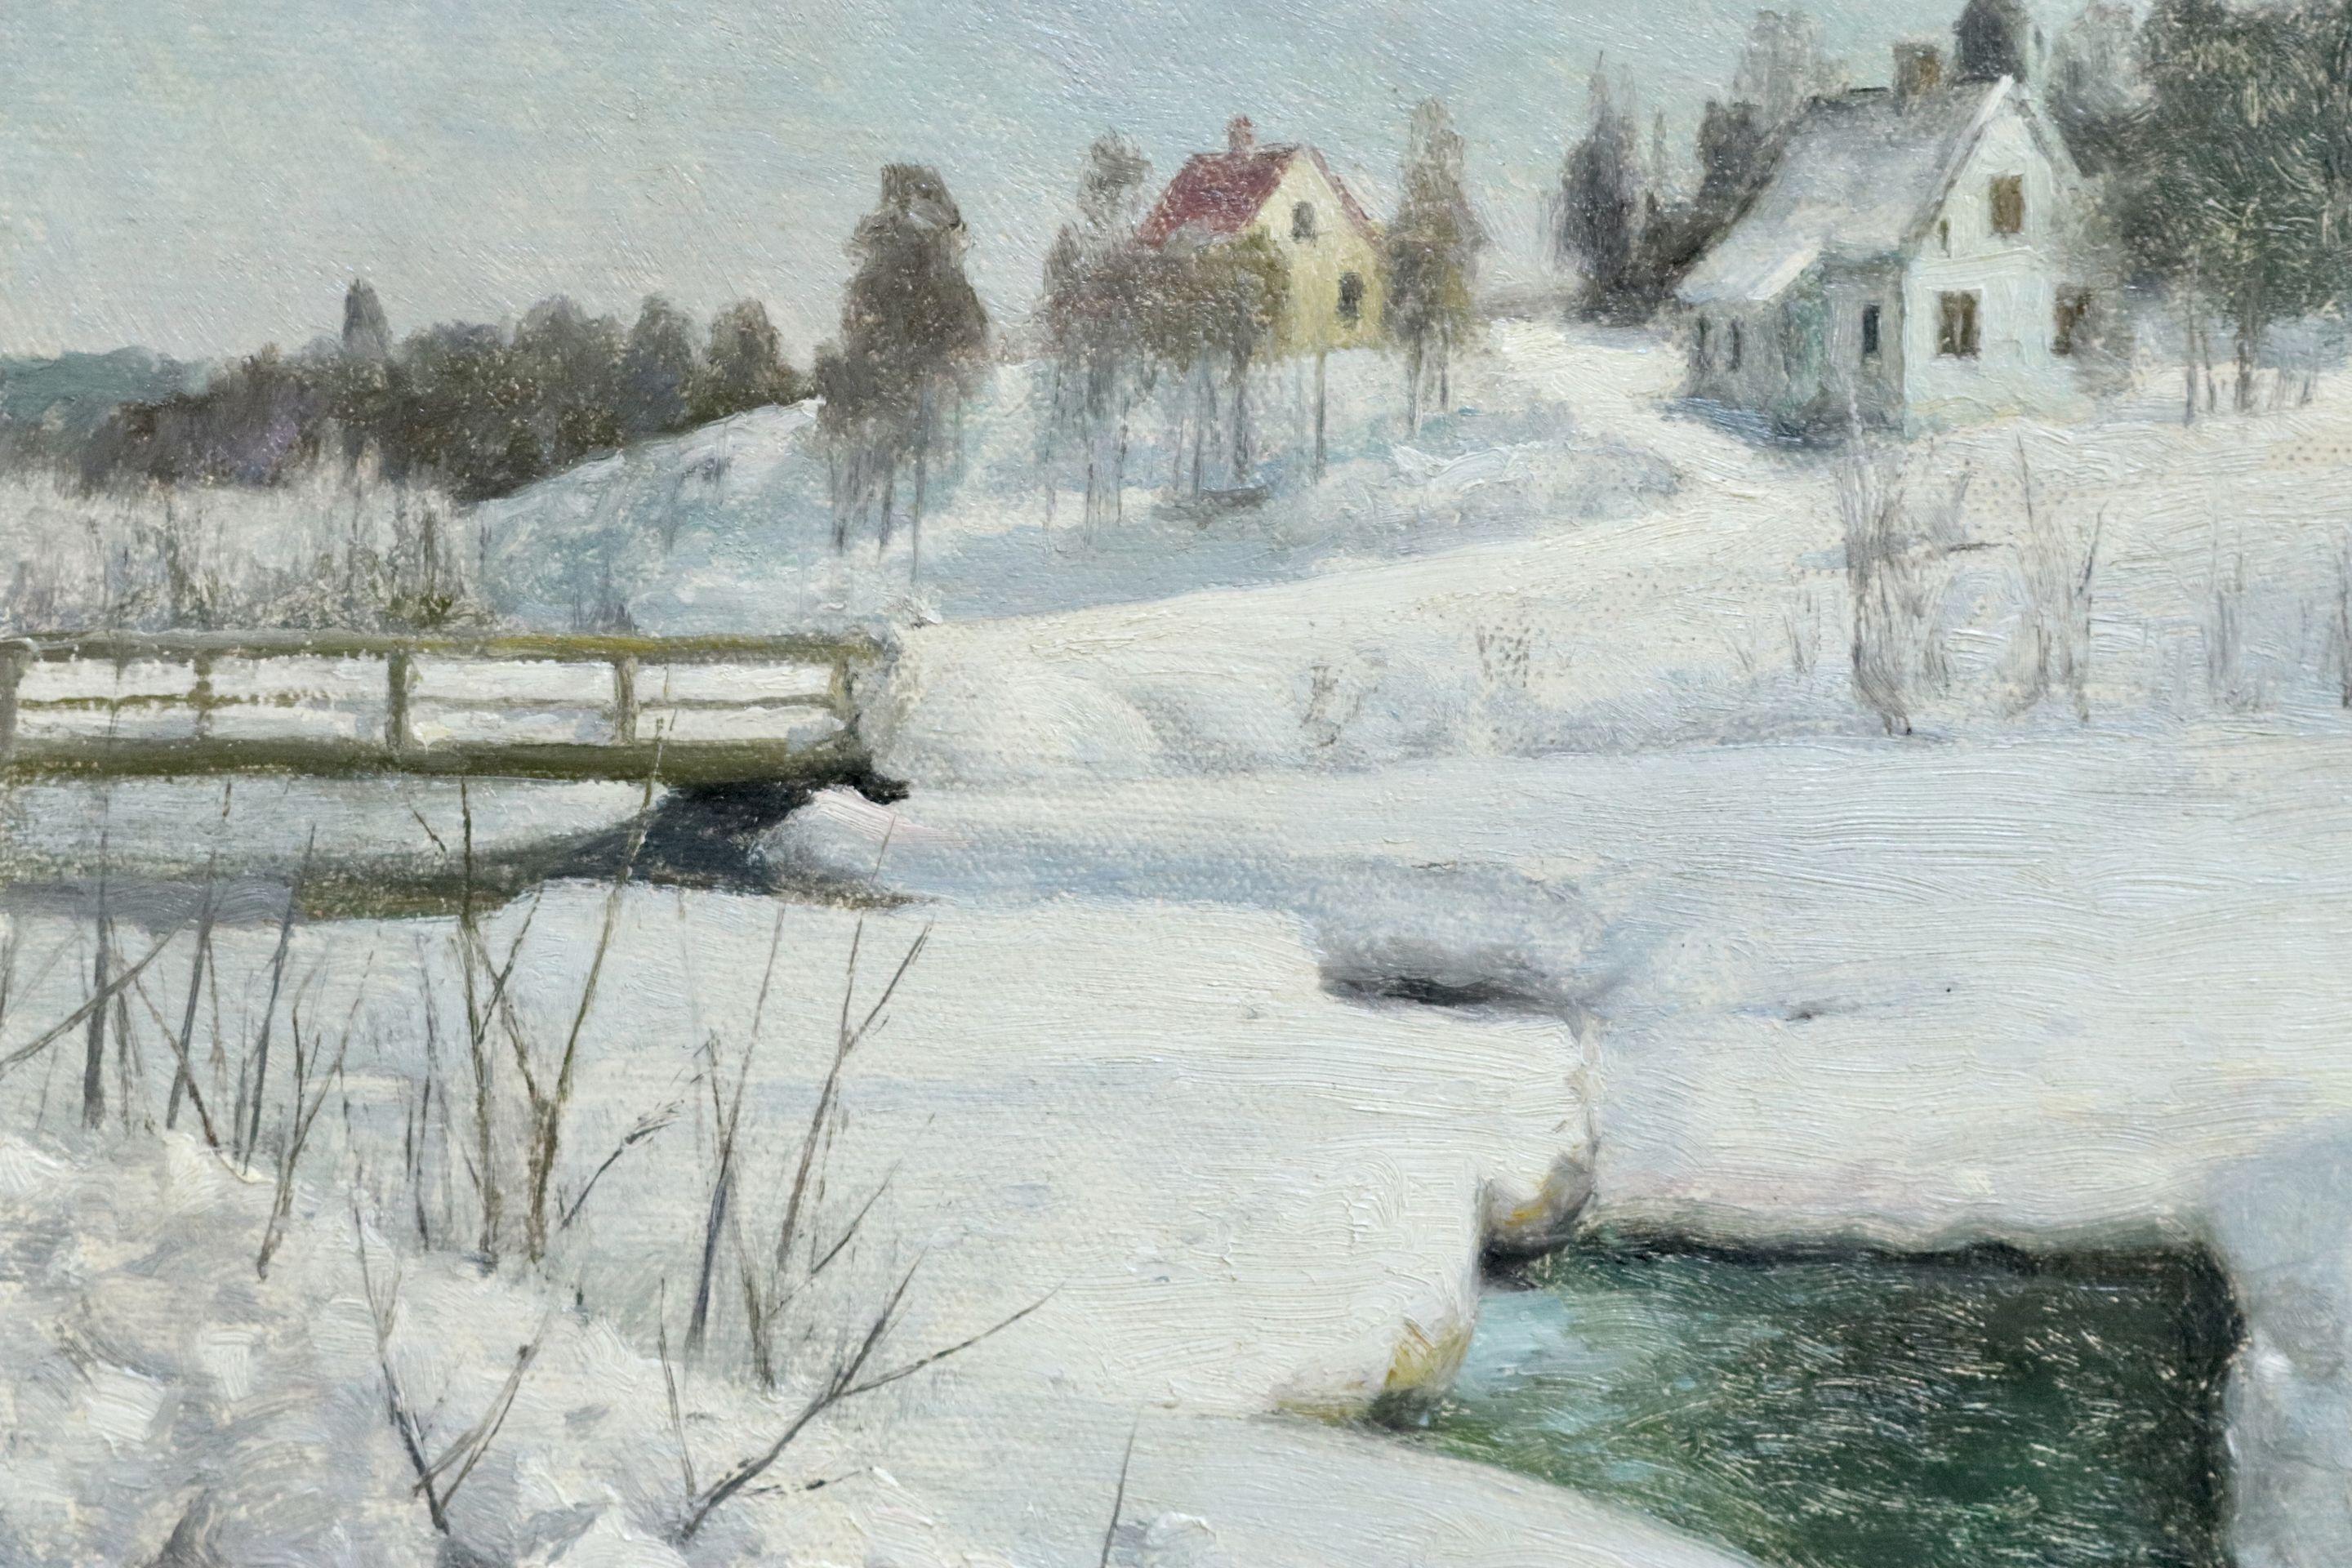 Hundselven, Norway - Winter - 20th Century Oil, Snow Landscape by Peder Monsted 2